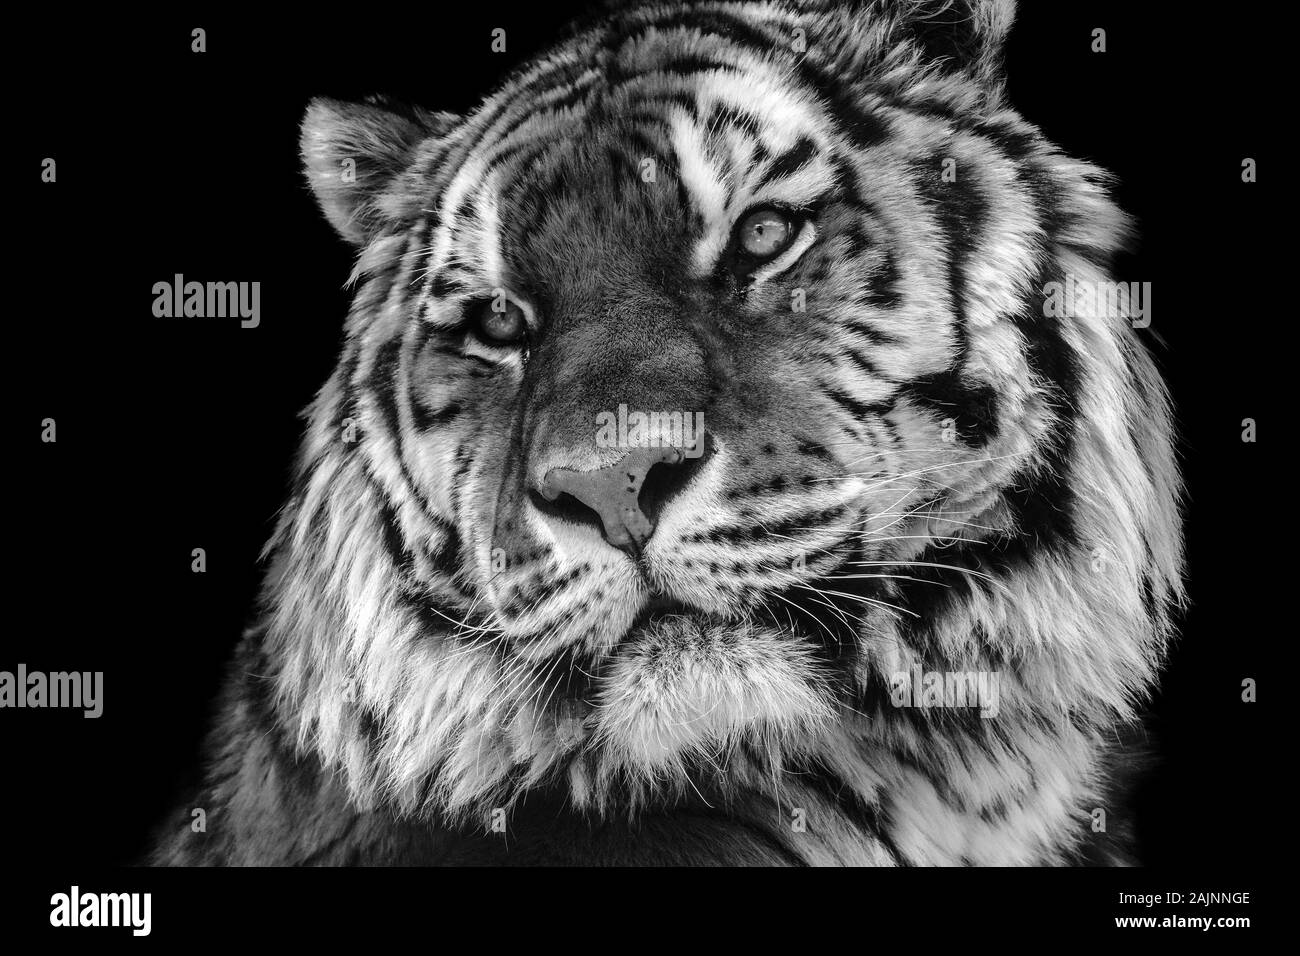 Bold contrast black and white tiger face close-up Stock Photo